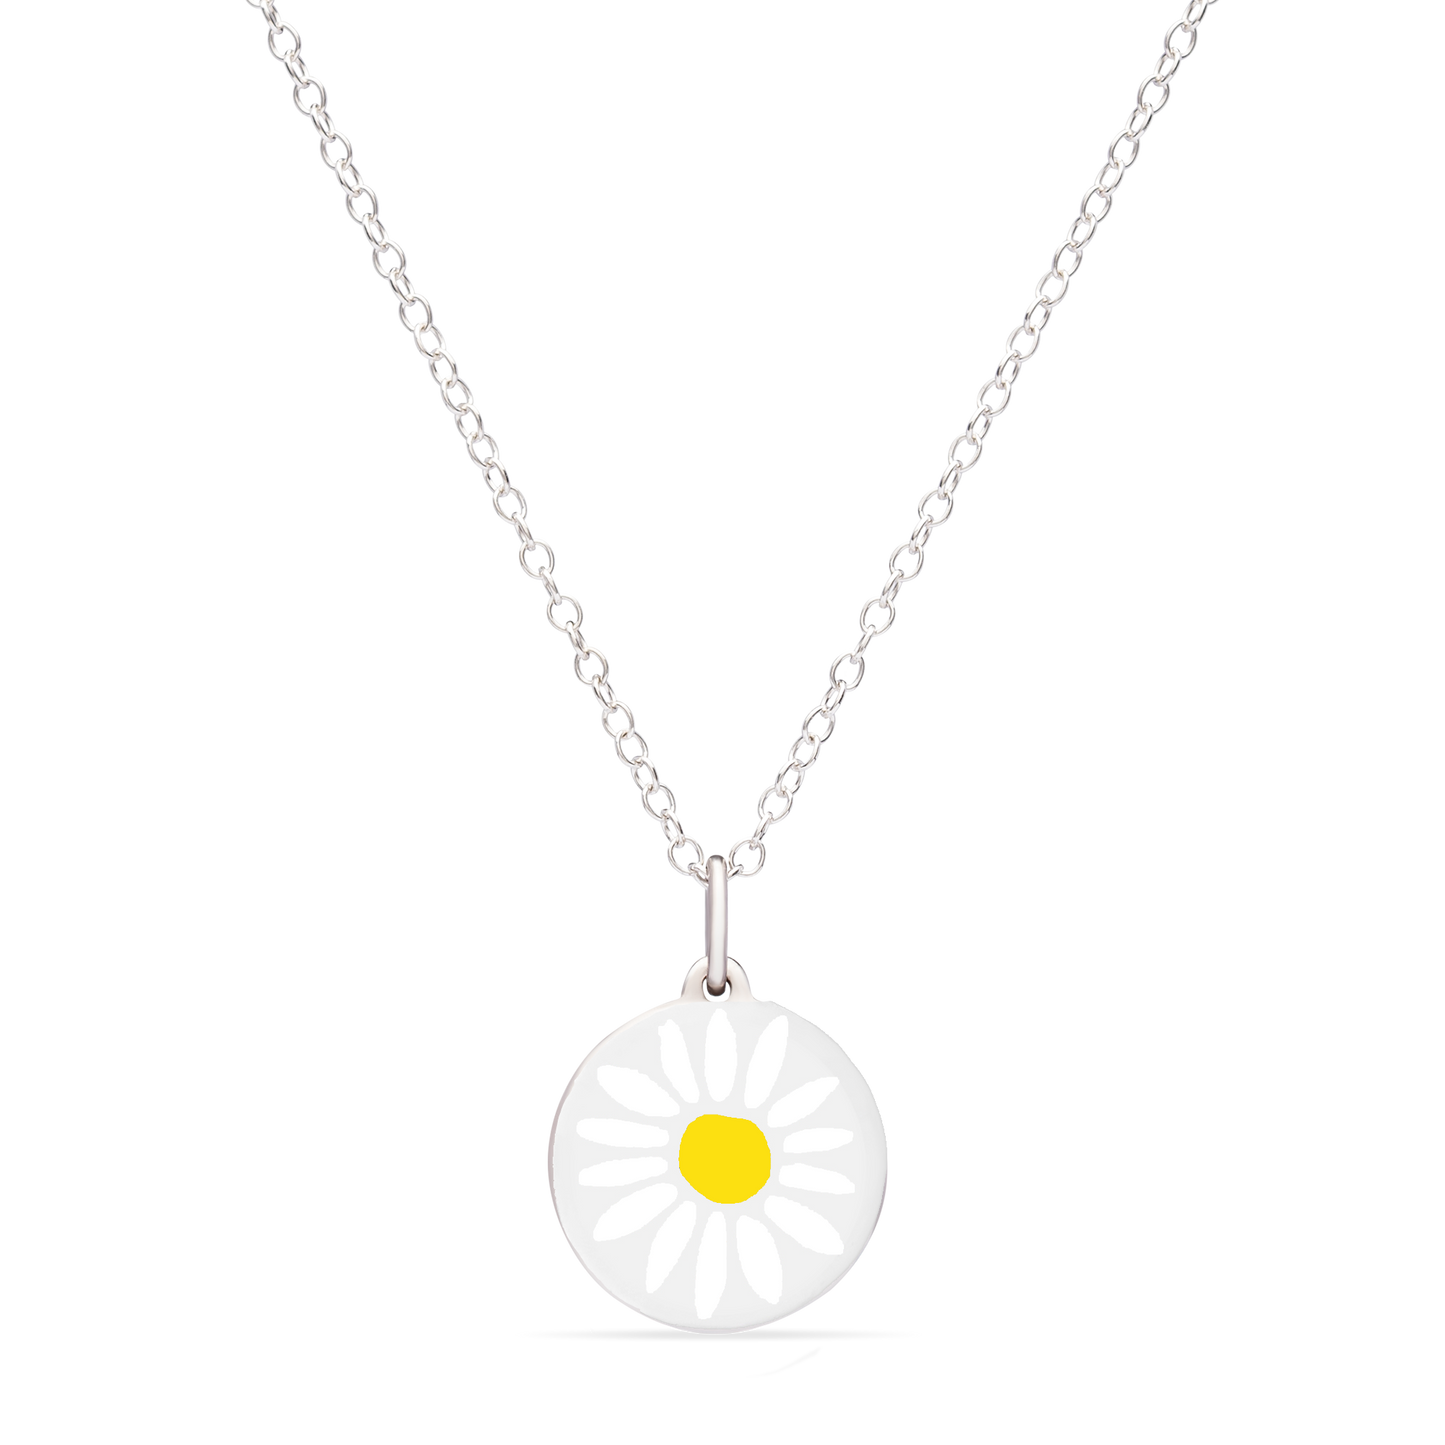 MINI DAISY CHARM sterling silver with rhodium plate